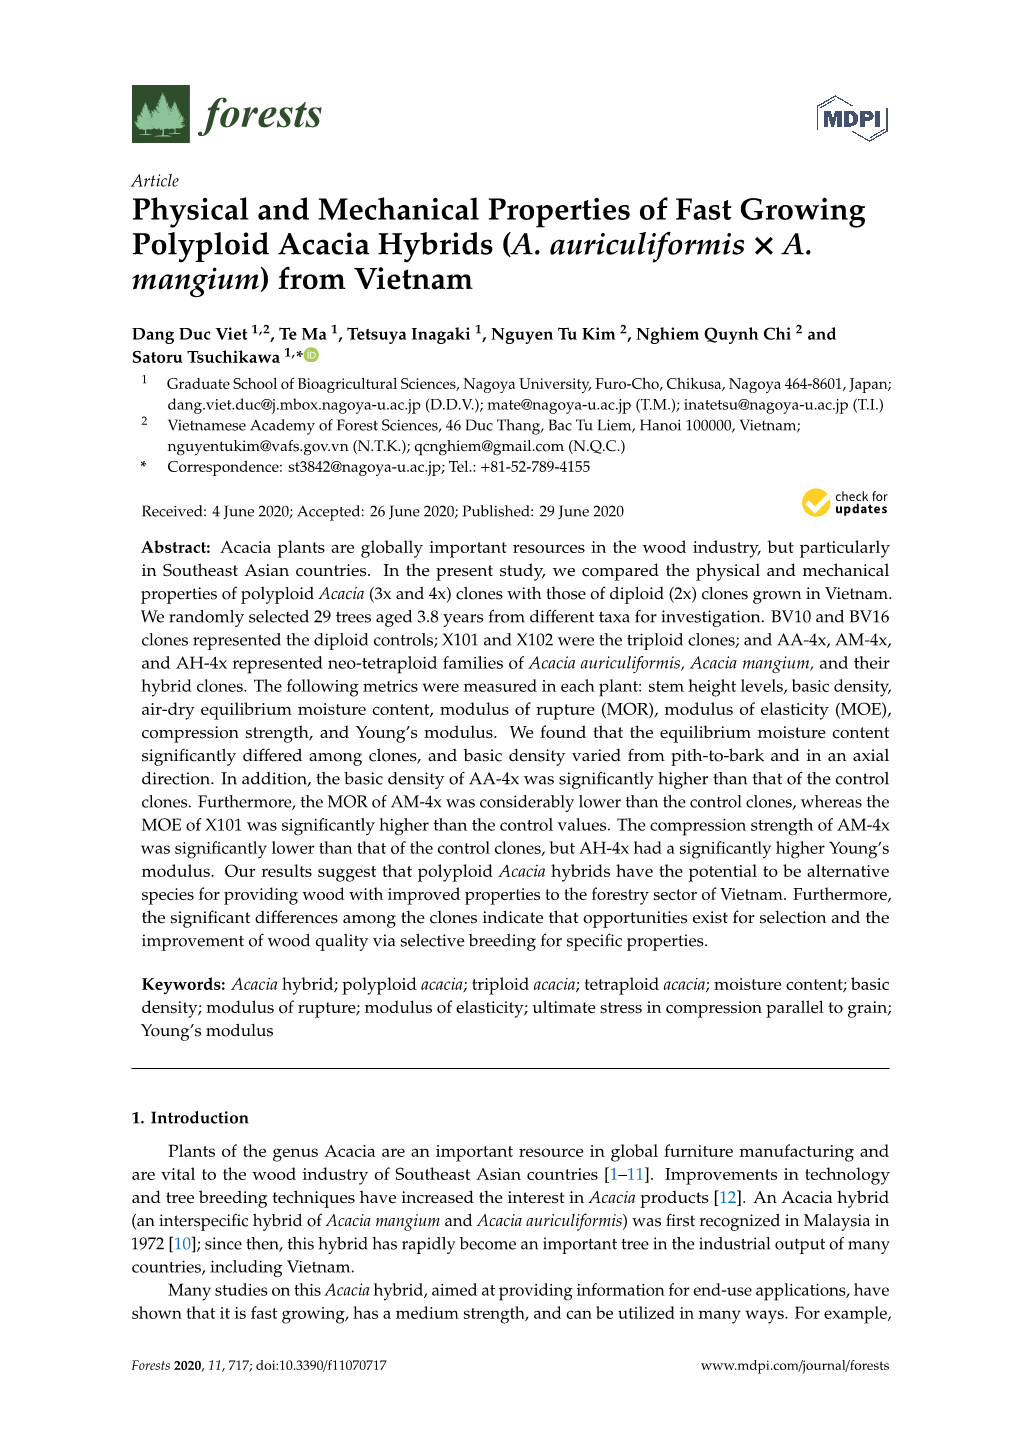 Physical and Mechanical Properties of Fast Growing Polyploid Acacia Hybrids (A